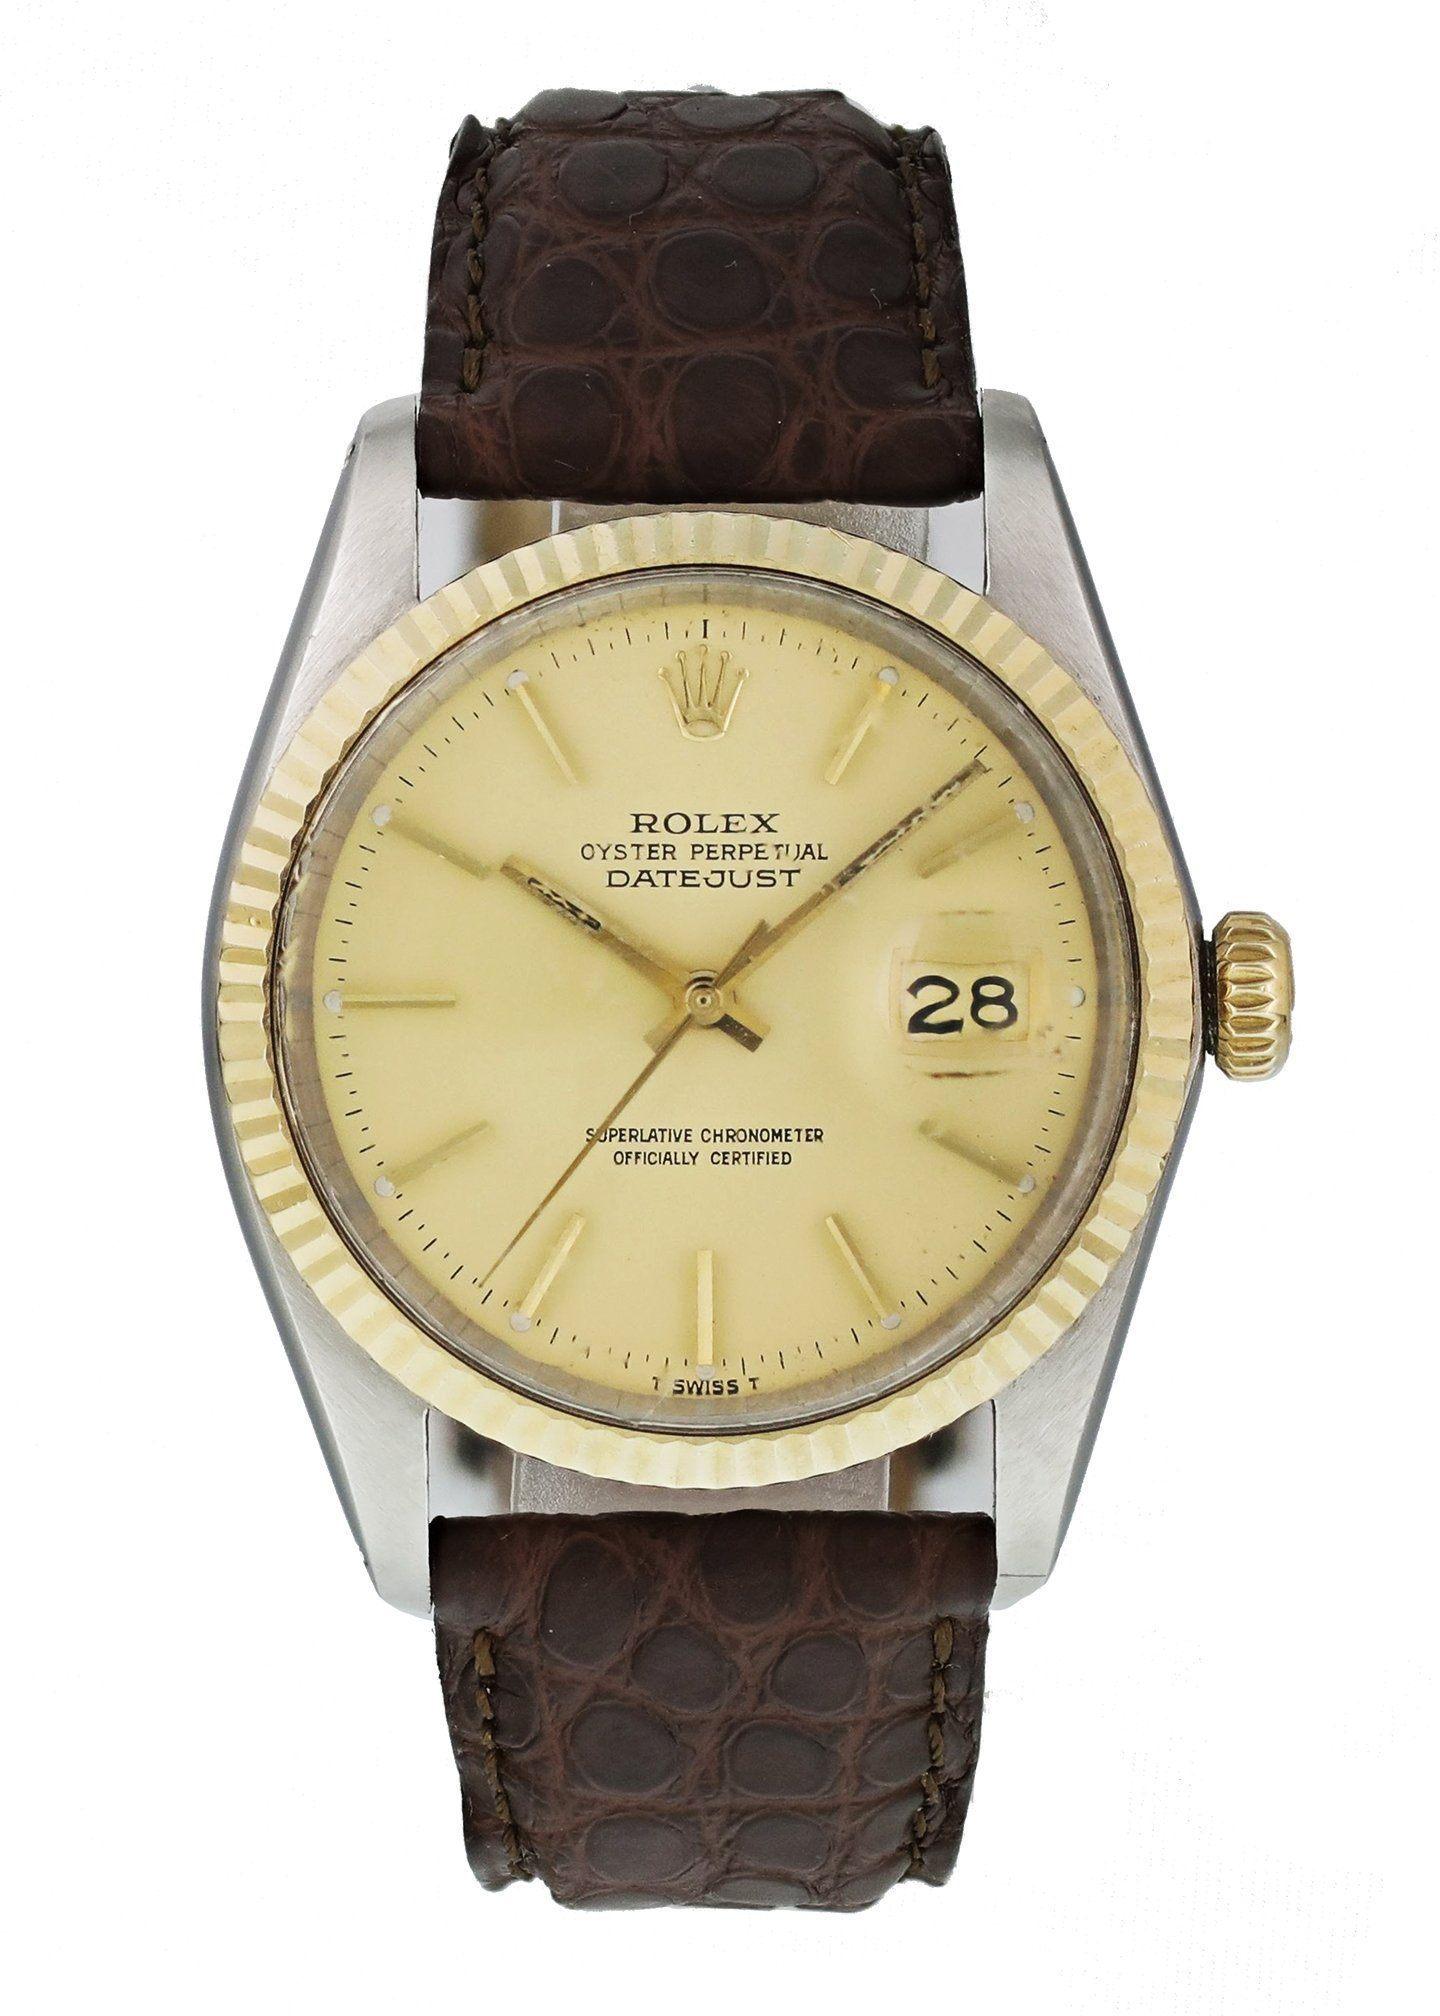 Rolex Datejust 16013 Men's Watch. 
36mm Stainless Steel case. 
Yellow Gold fluted bezel. 
Champagne dial with gold hands and index hour markers. 
Minute markers on the outer dial. 
Date display at the 3 o'clock position. 
Leather Strap with Tang